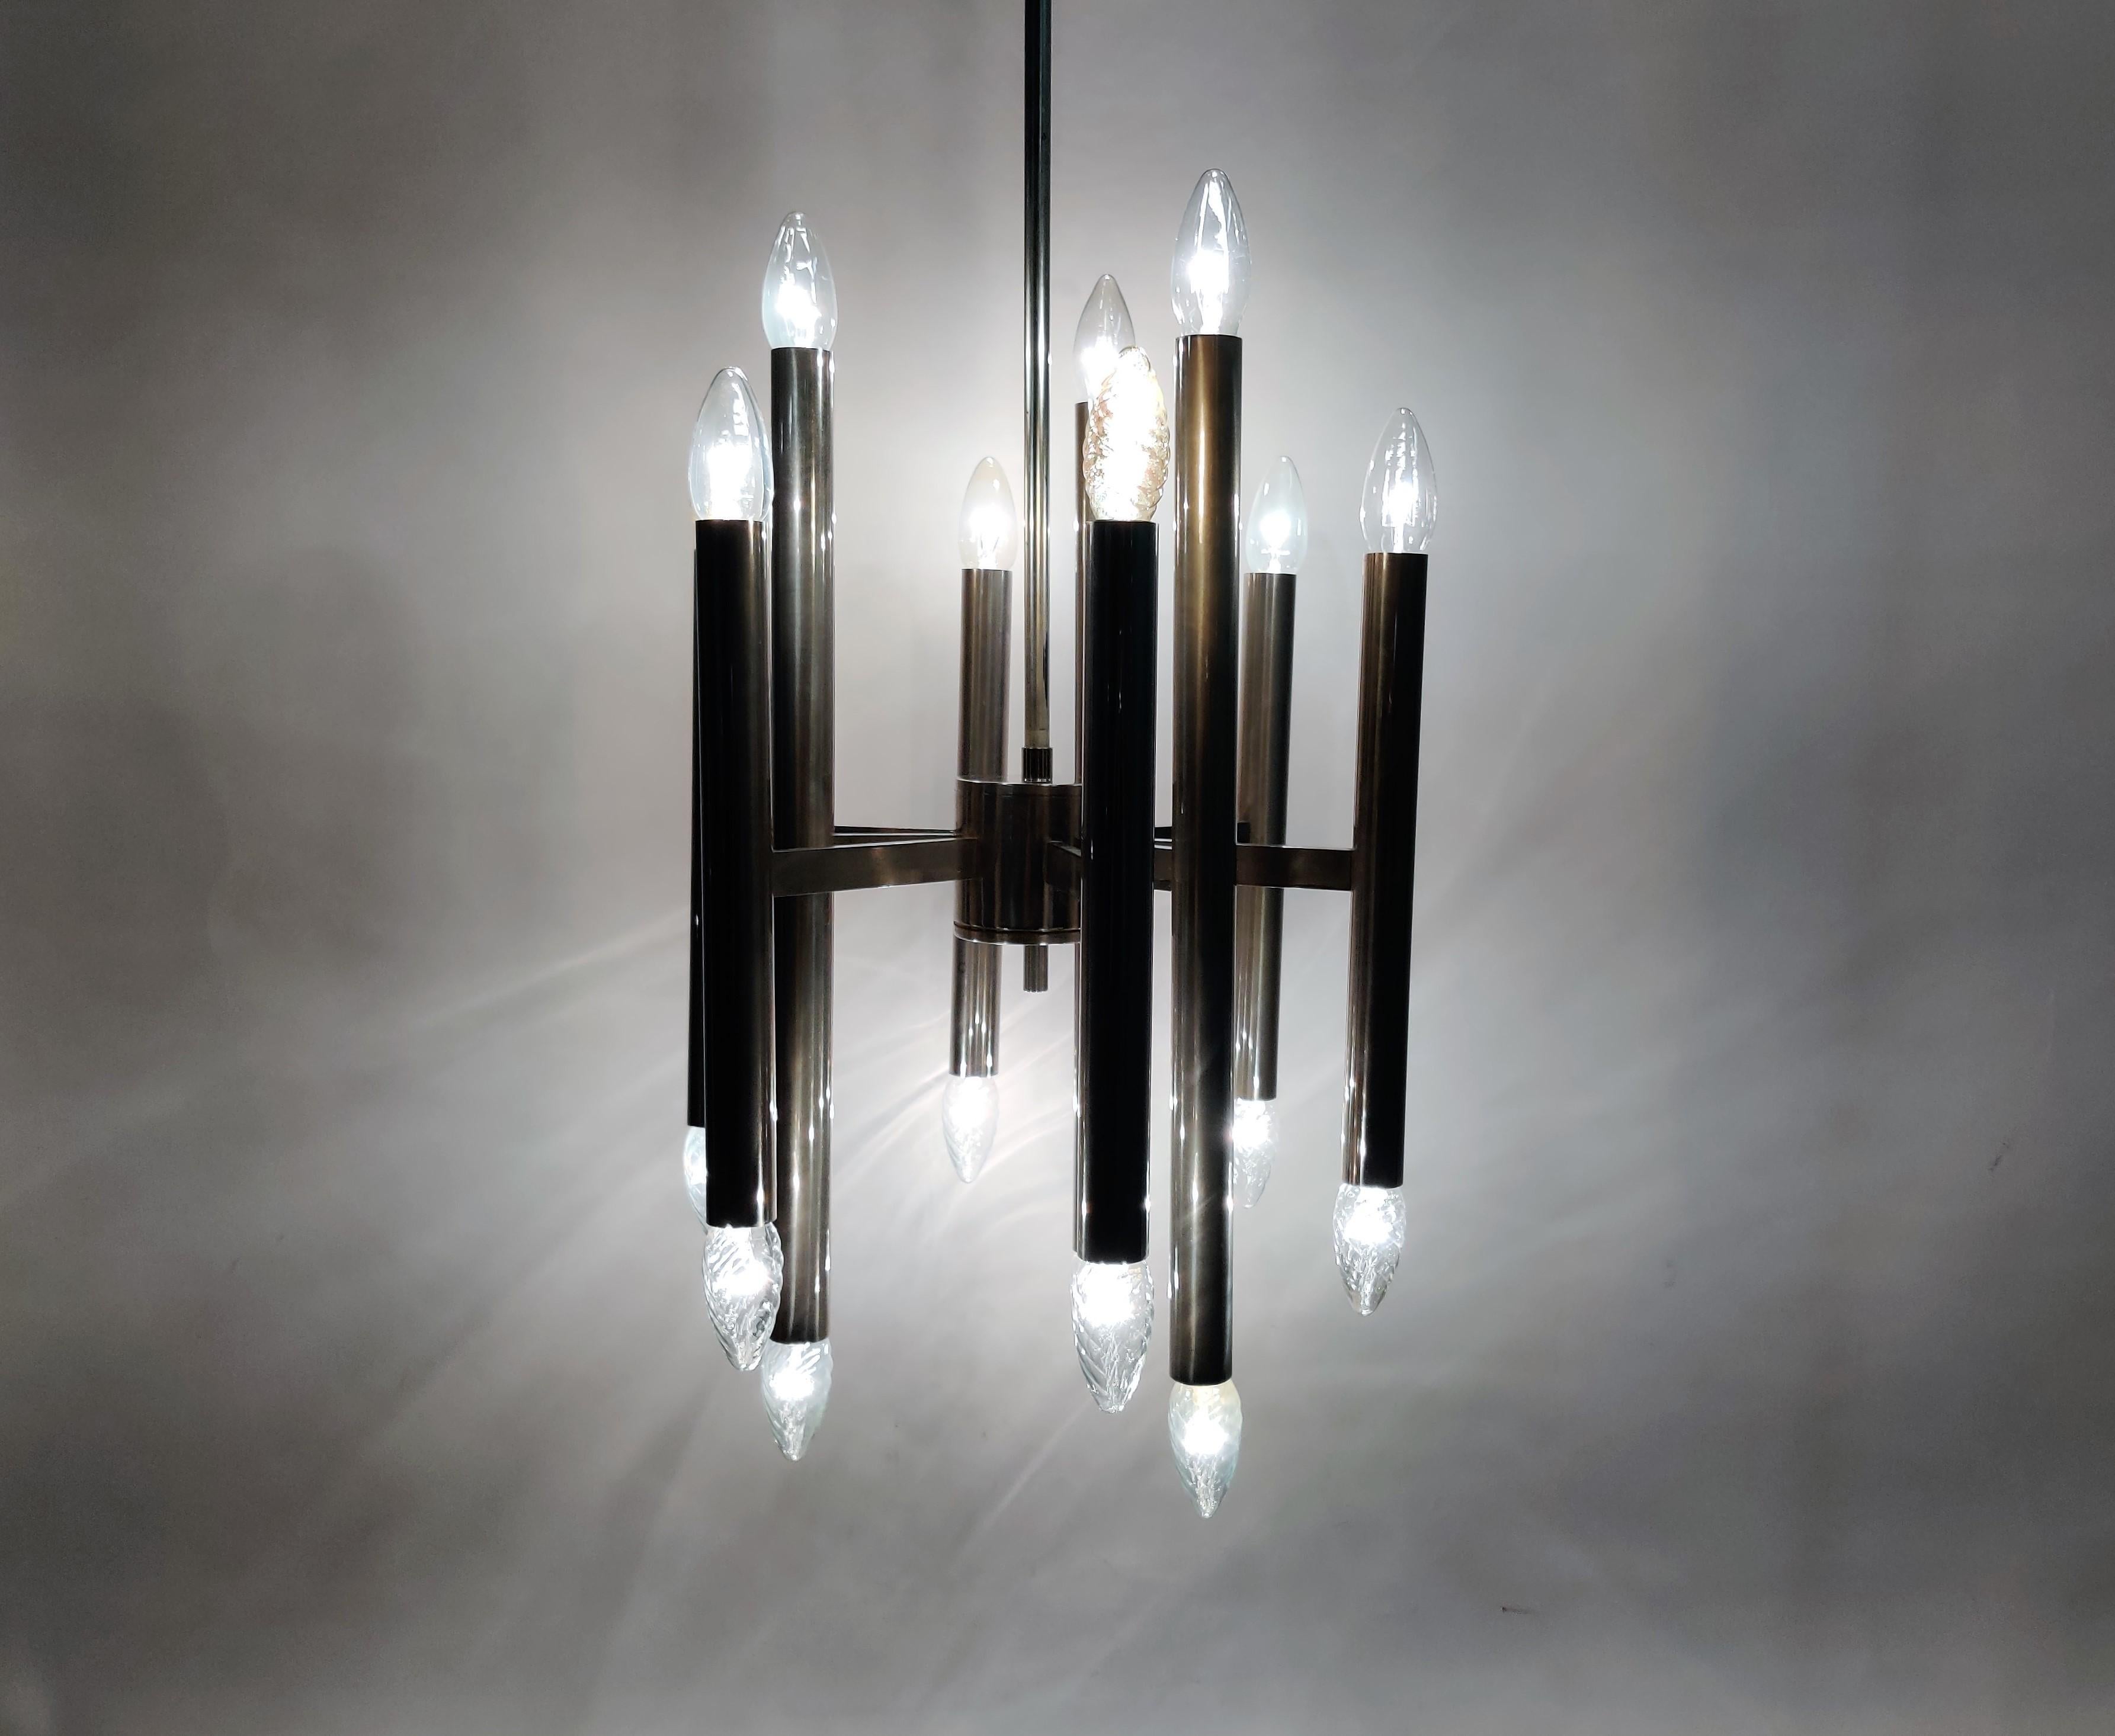 Chrome candle chandelier with 18 light points designed by Gaetano Sciolari for Boulanger.

Very good condition, no discoloring or rust stains on the chandelier.

Tested and ready for use with regular E14 light bulbs,

1970s, Italy

Measures: